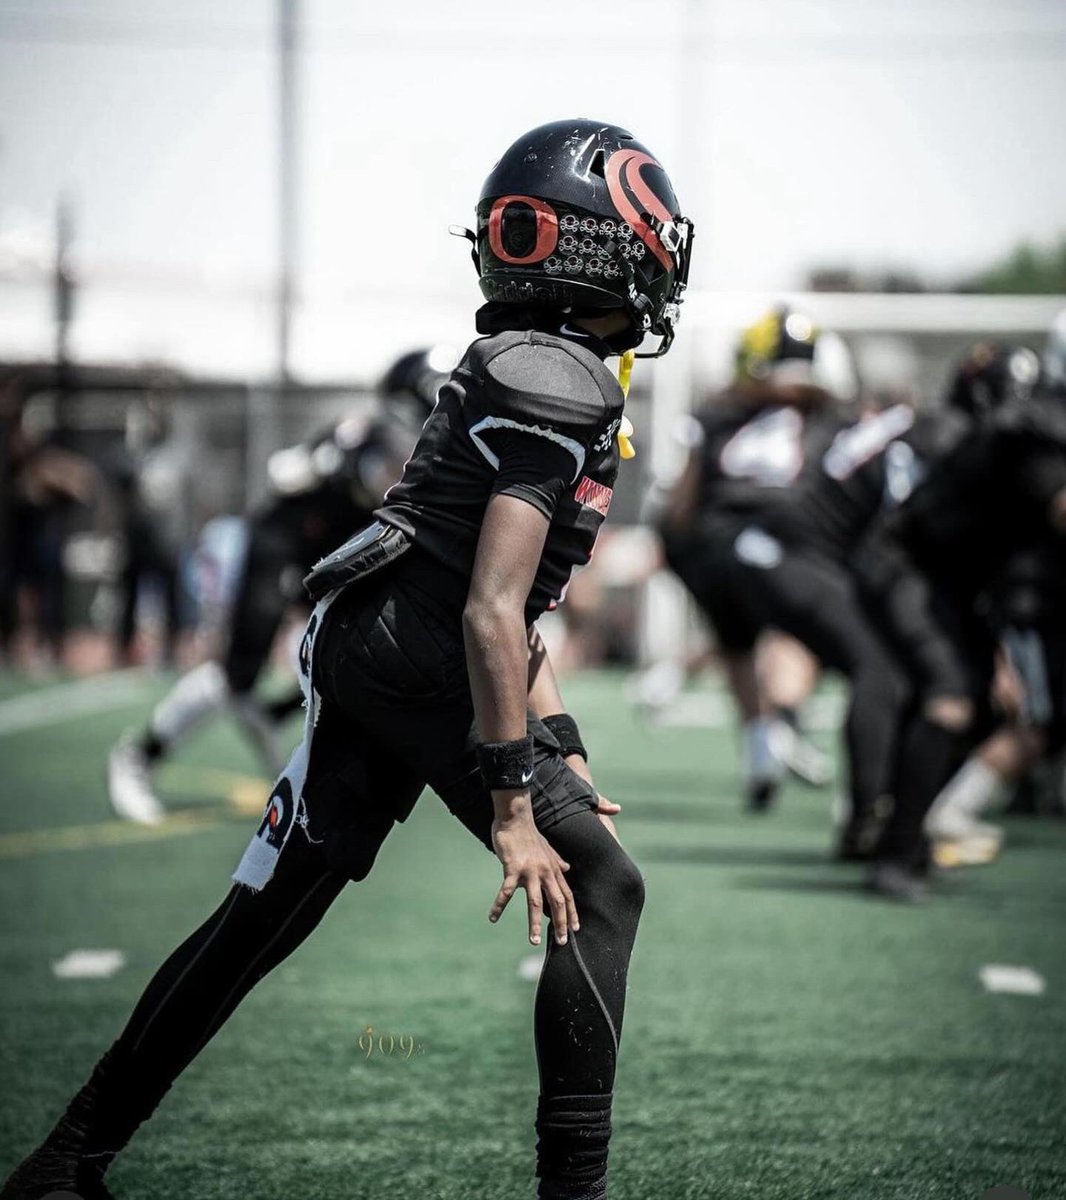 Contact us for all your Custom Sports Uniforms & Apparels #athleticforce1 🧑‍💻athleticforce1.com 📧 info@athleticforce1.com ☎️ 707-741-5737 IG: @athleticforce1 @RVCshowcase @HighSchoolBlitz @CoachDunnigan8 @LionHearted7v7 @CoachRaciti @CoachAray